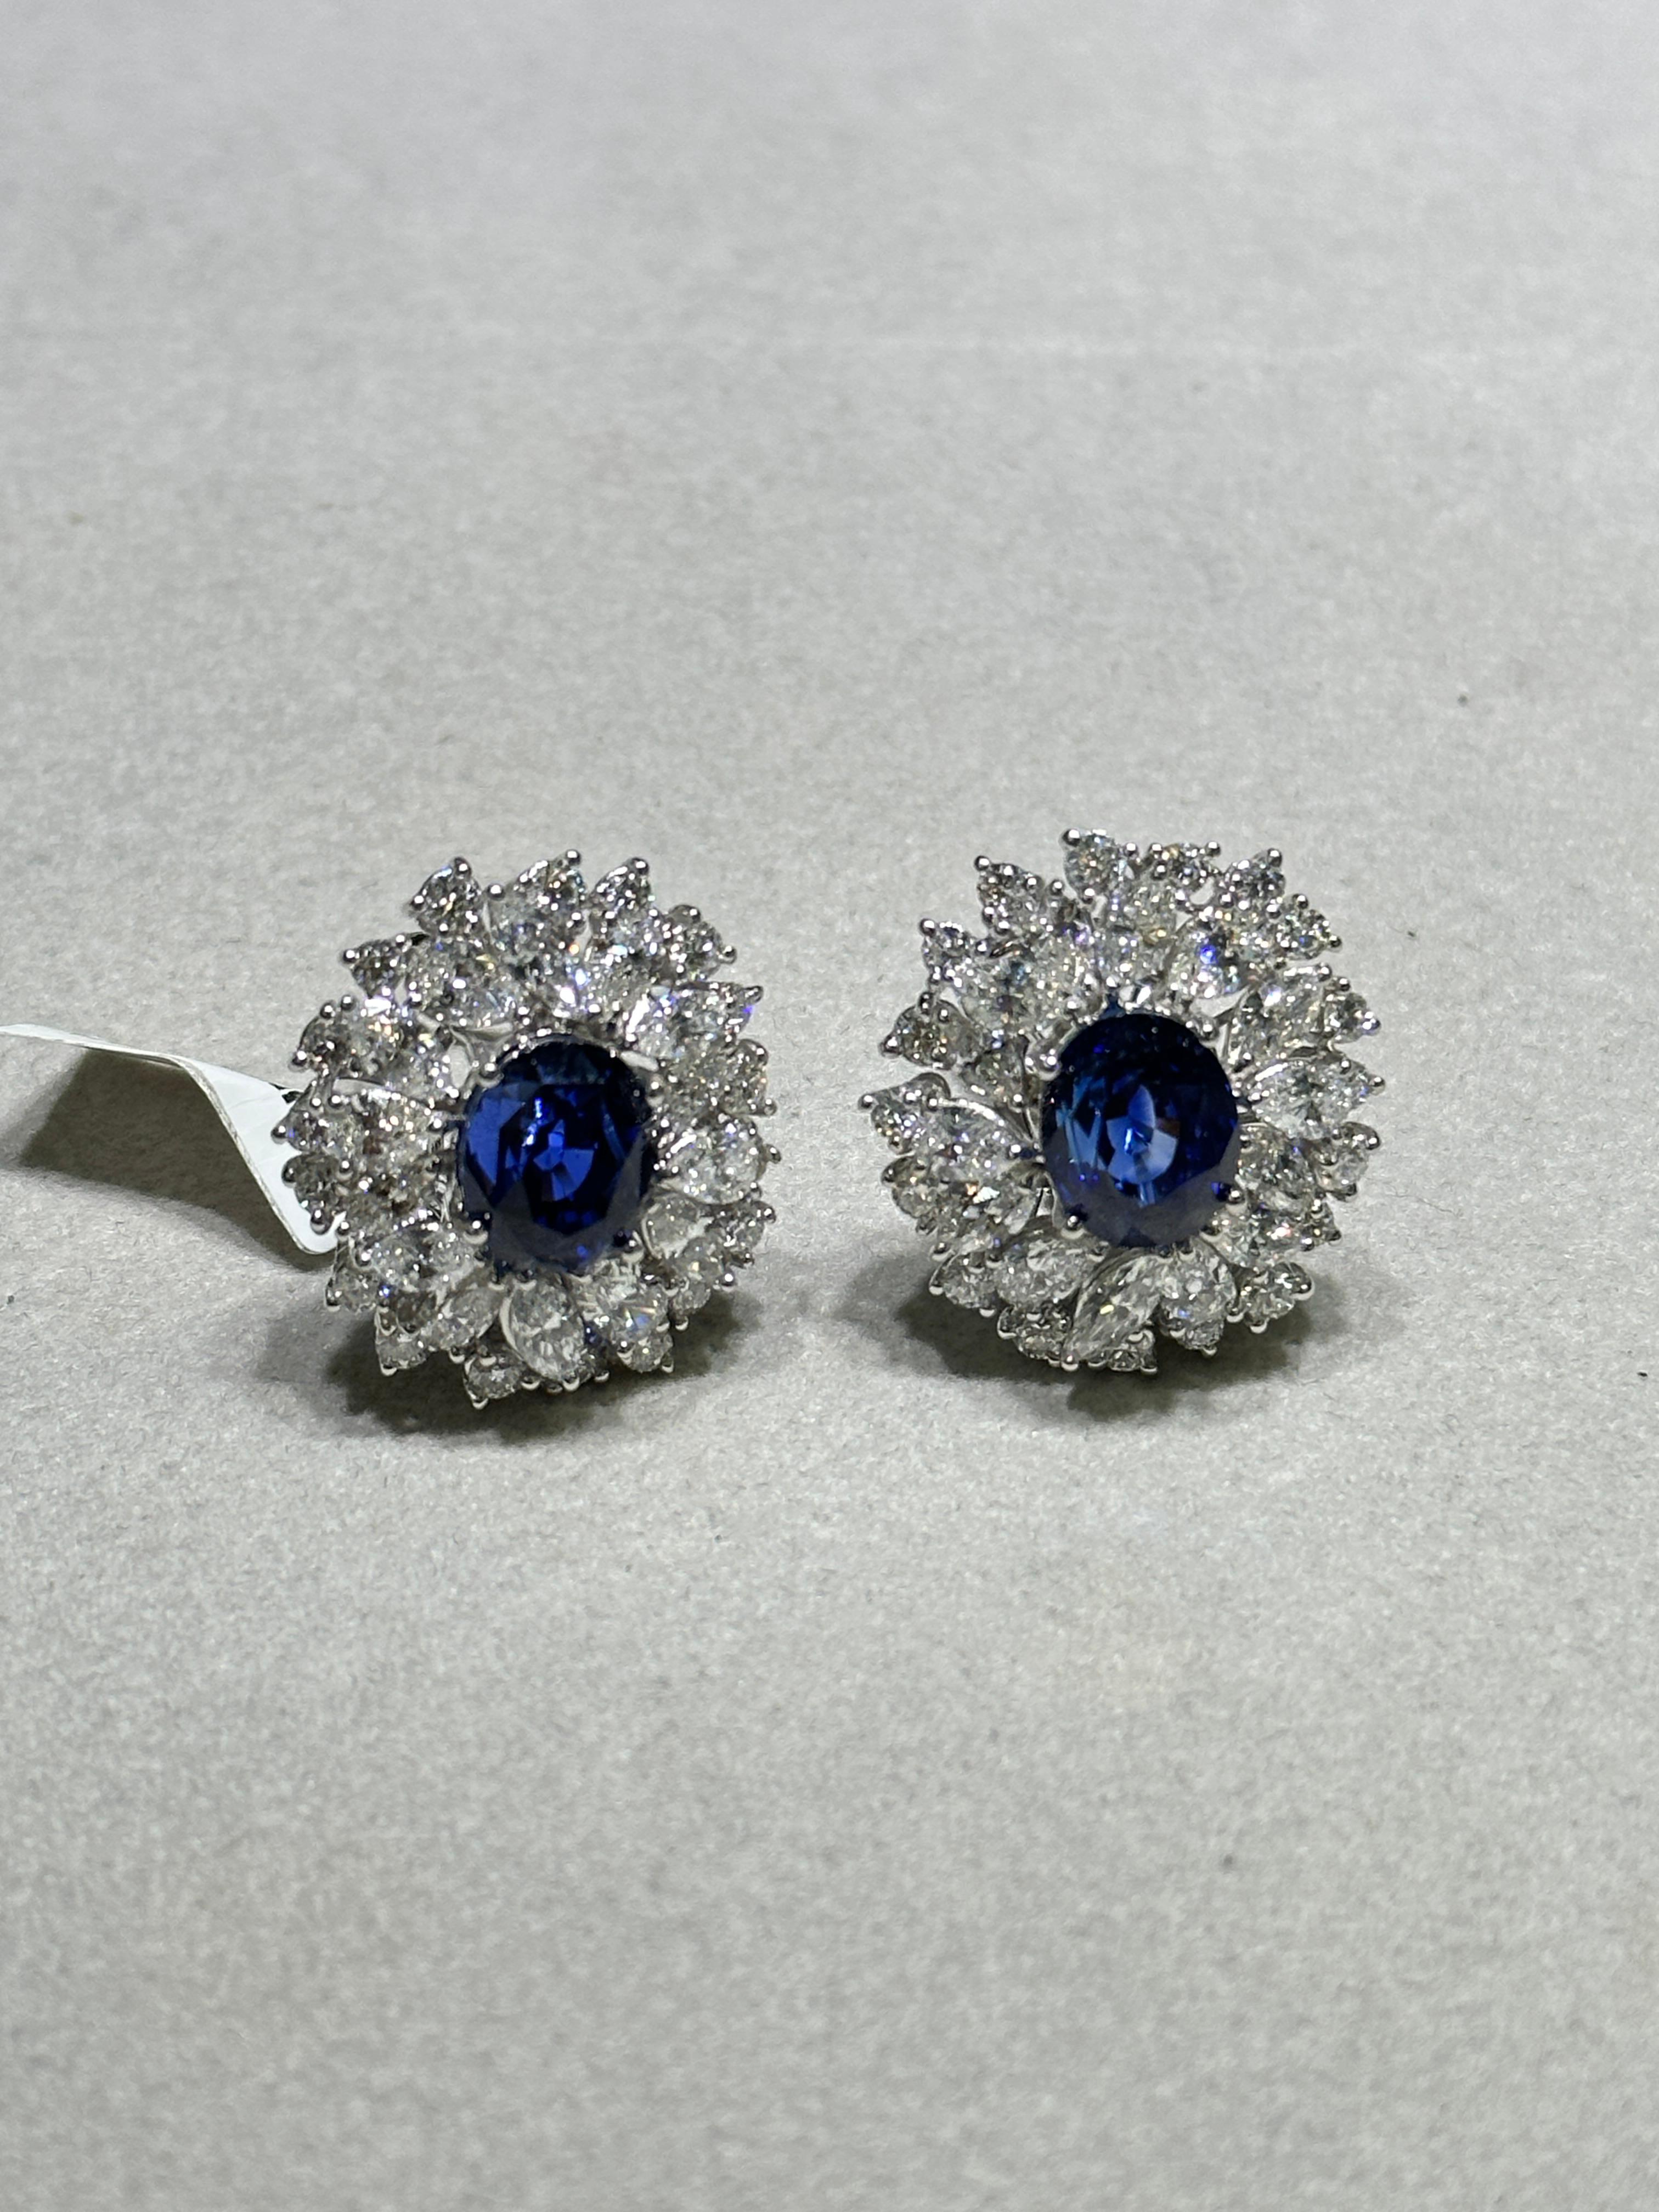 The Following Item we are offering is a Rare Important Radiant 18KT Gold Large Rare Fancy Blue Ceylon Sapphire and Diamond Earrings. Earrings are comprised of Gorgeous Ceylon Blue Sapphires Spectacularly Set in and surrounded by Magnificent